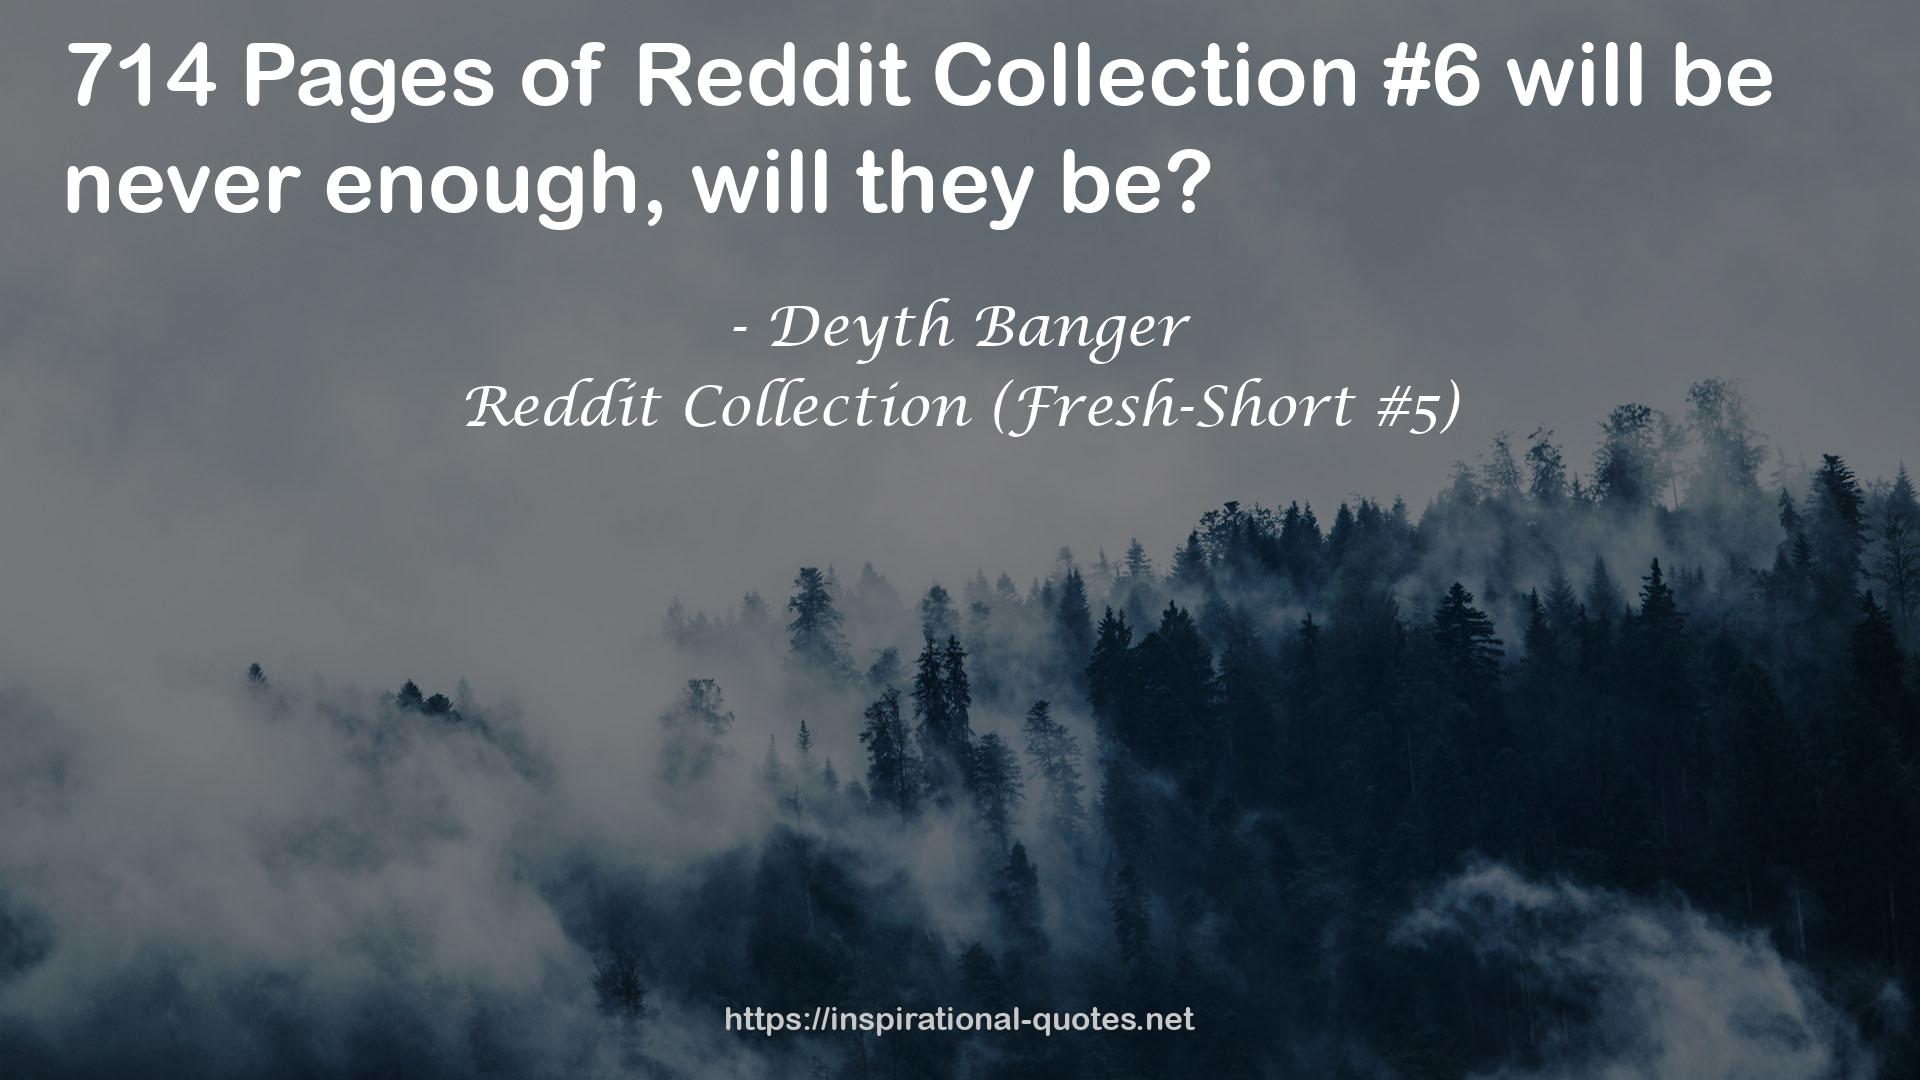 Reddit Collection (Fresh-Short #5) QUOTES